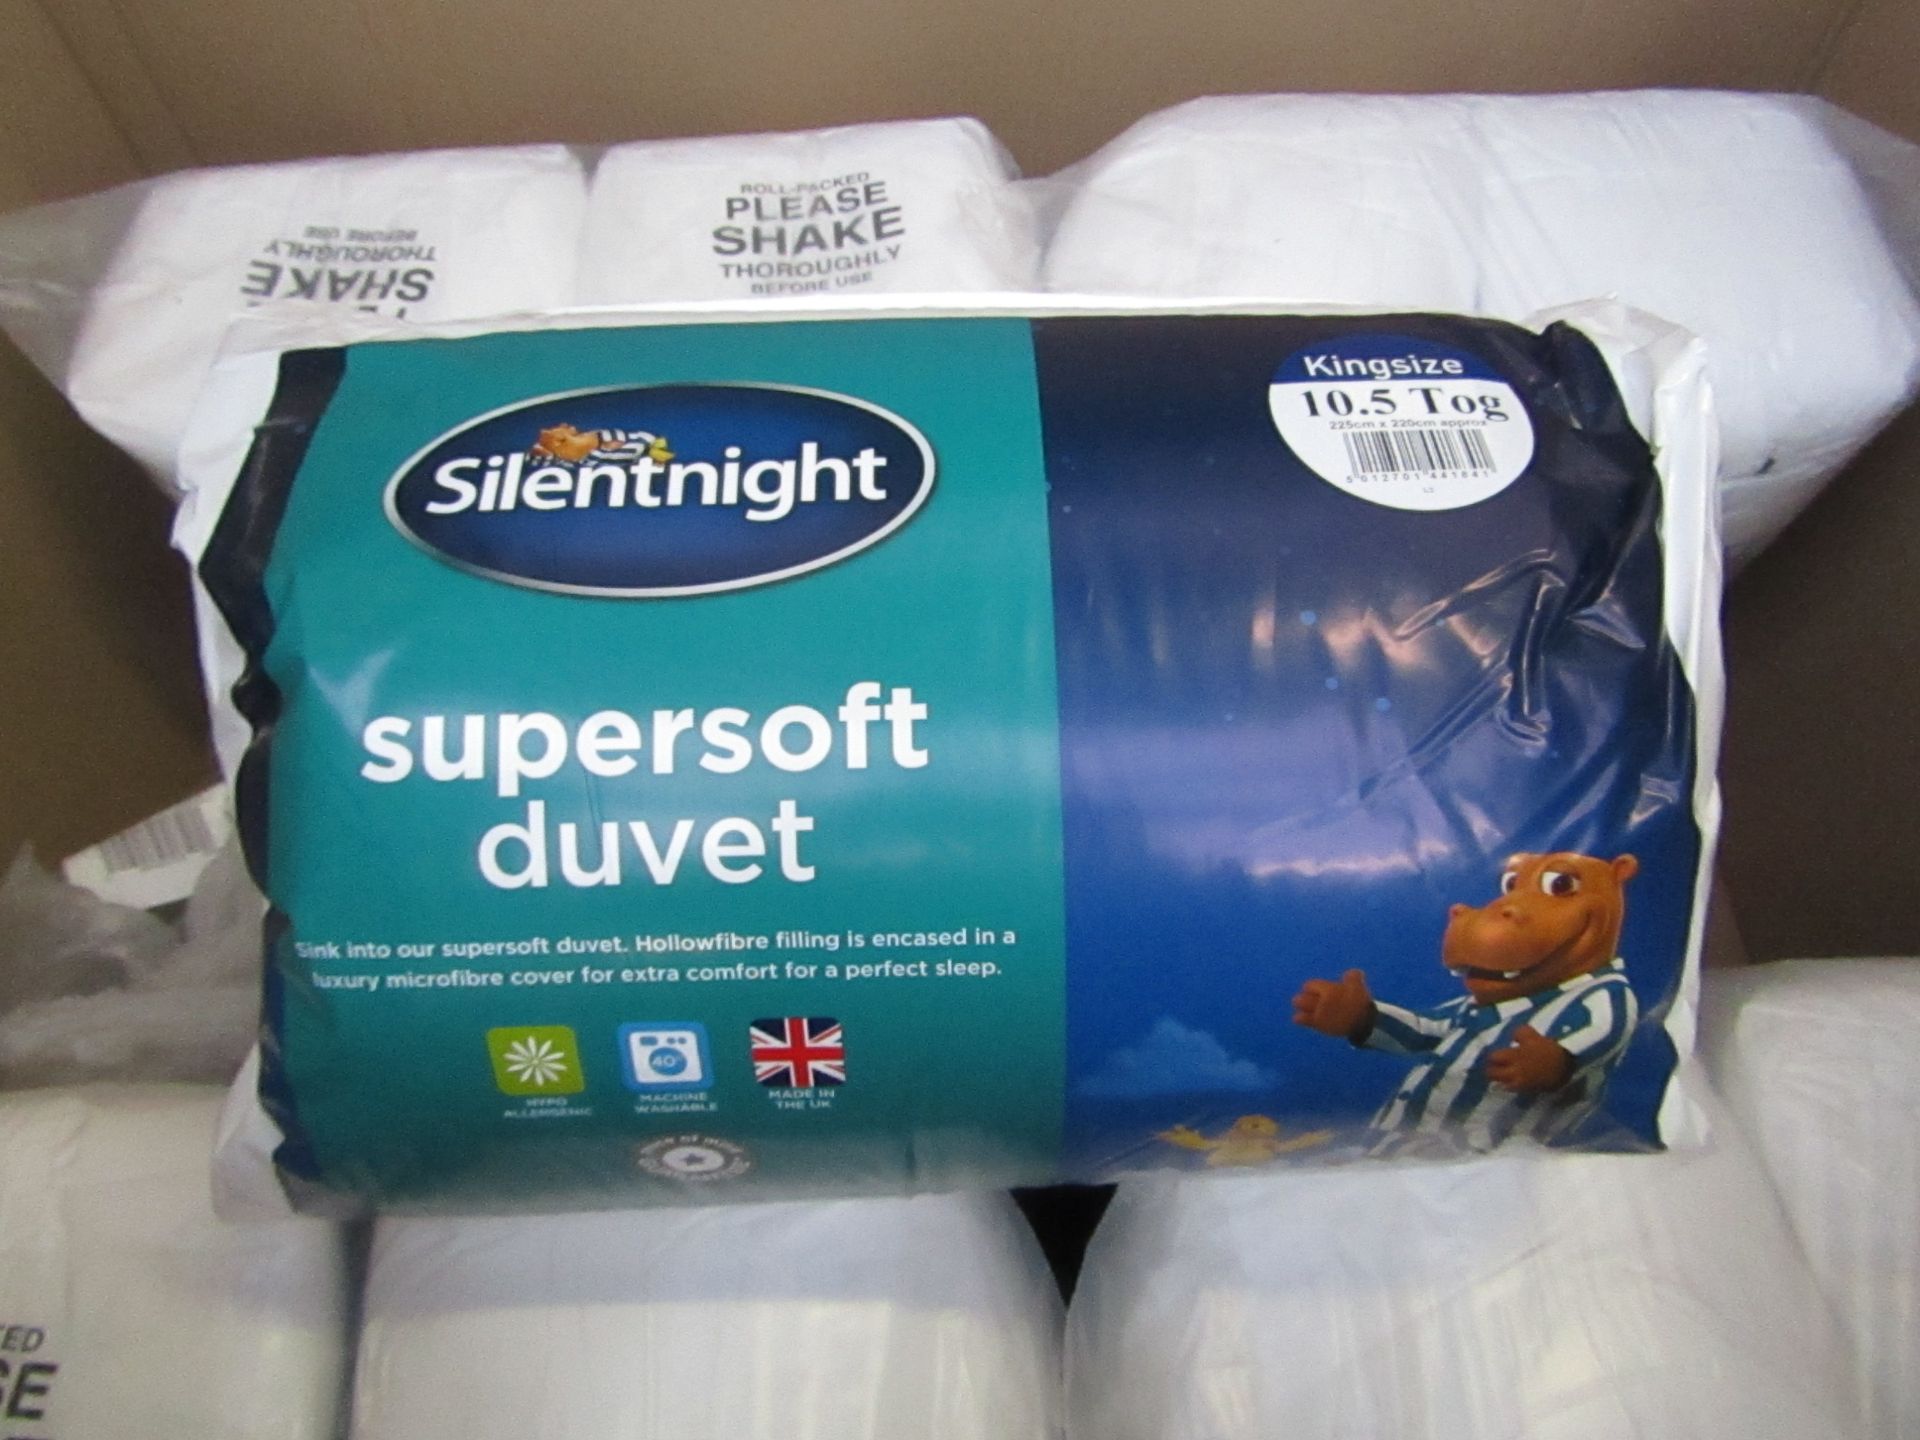 4x Silentnight Supersoft duvet, kingsize, 10.5 Tog, all brand new and packaged. Each RRP £24.99